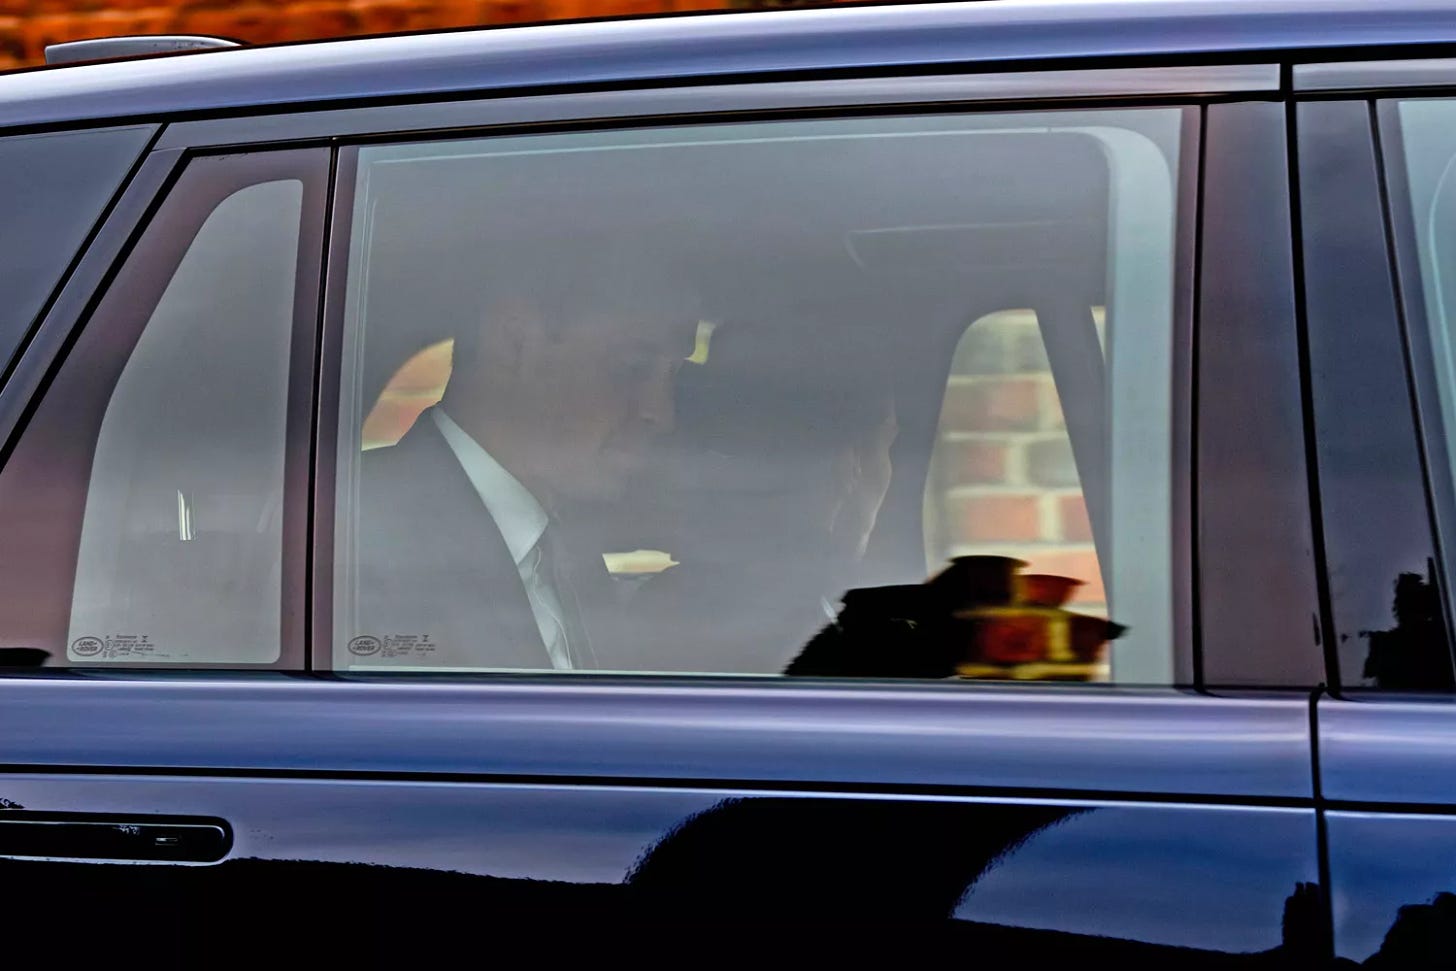 Prince William, Kate Middleton - Prince William leaves Windsor Castle to attend The Commonwealth Day Service at Westminster Abbey. Catherine is seen sitting next to him.